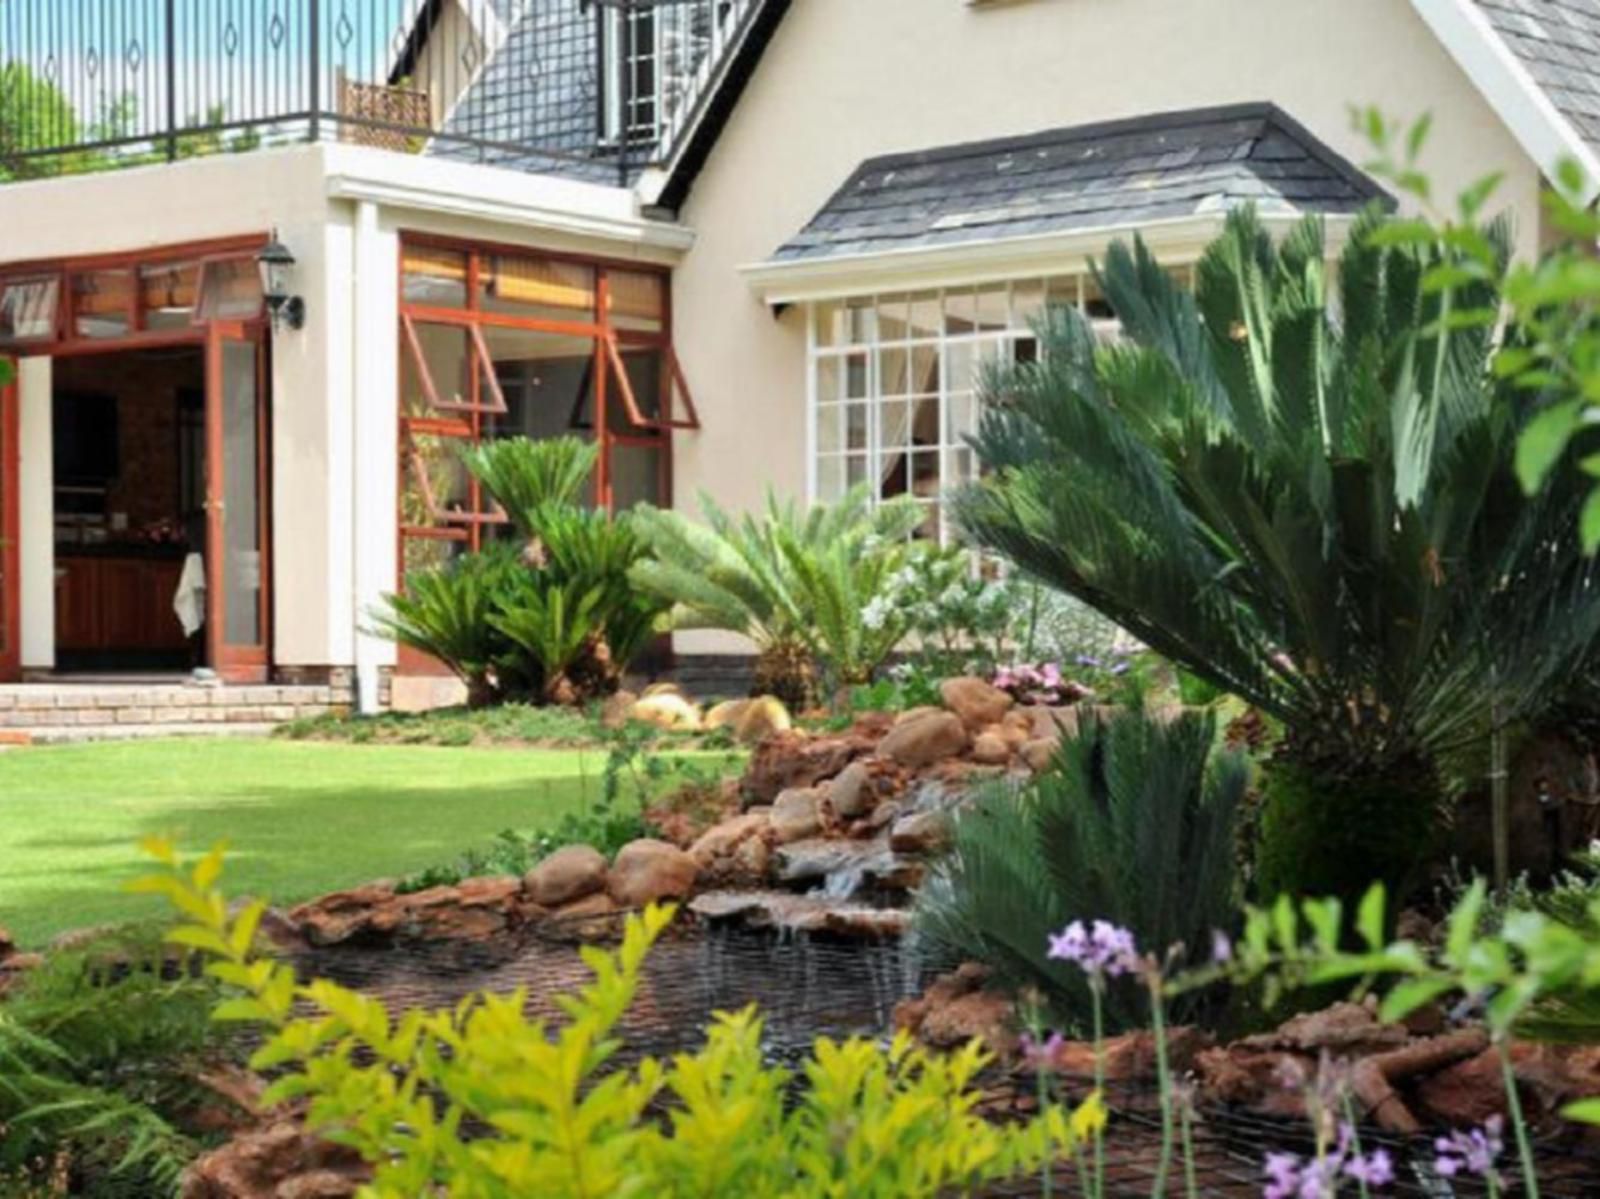 Gallo Manor Executive Bed And Breakfast Gallo Manor Johannesburg Gauteng South Africa House, Building, Architecture, Plant, Nature, Garden